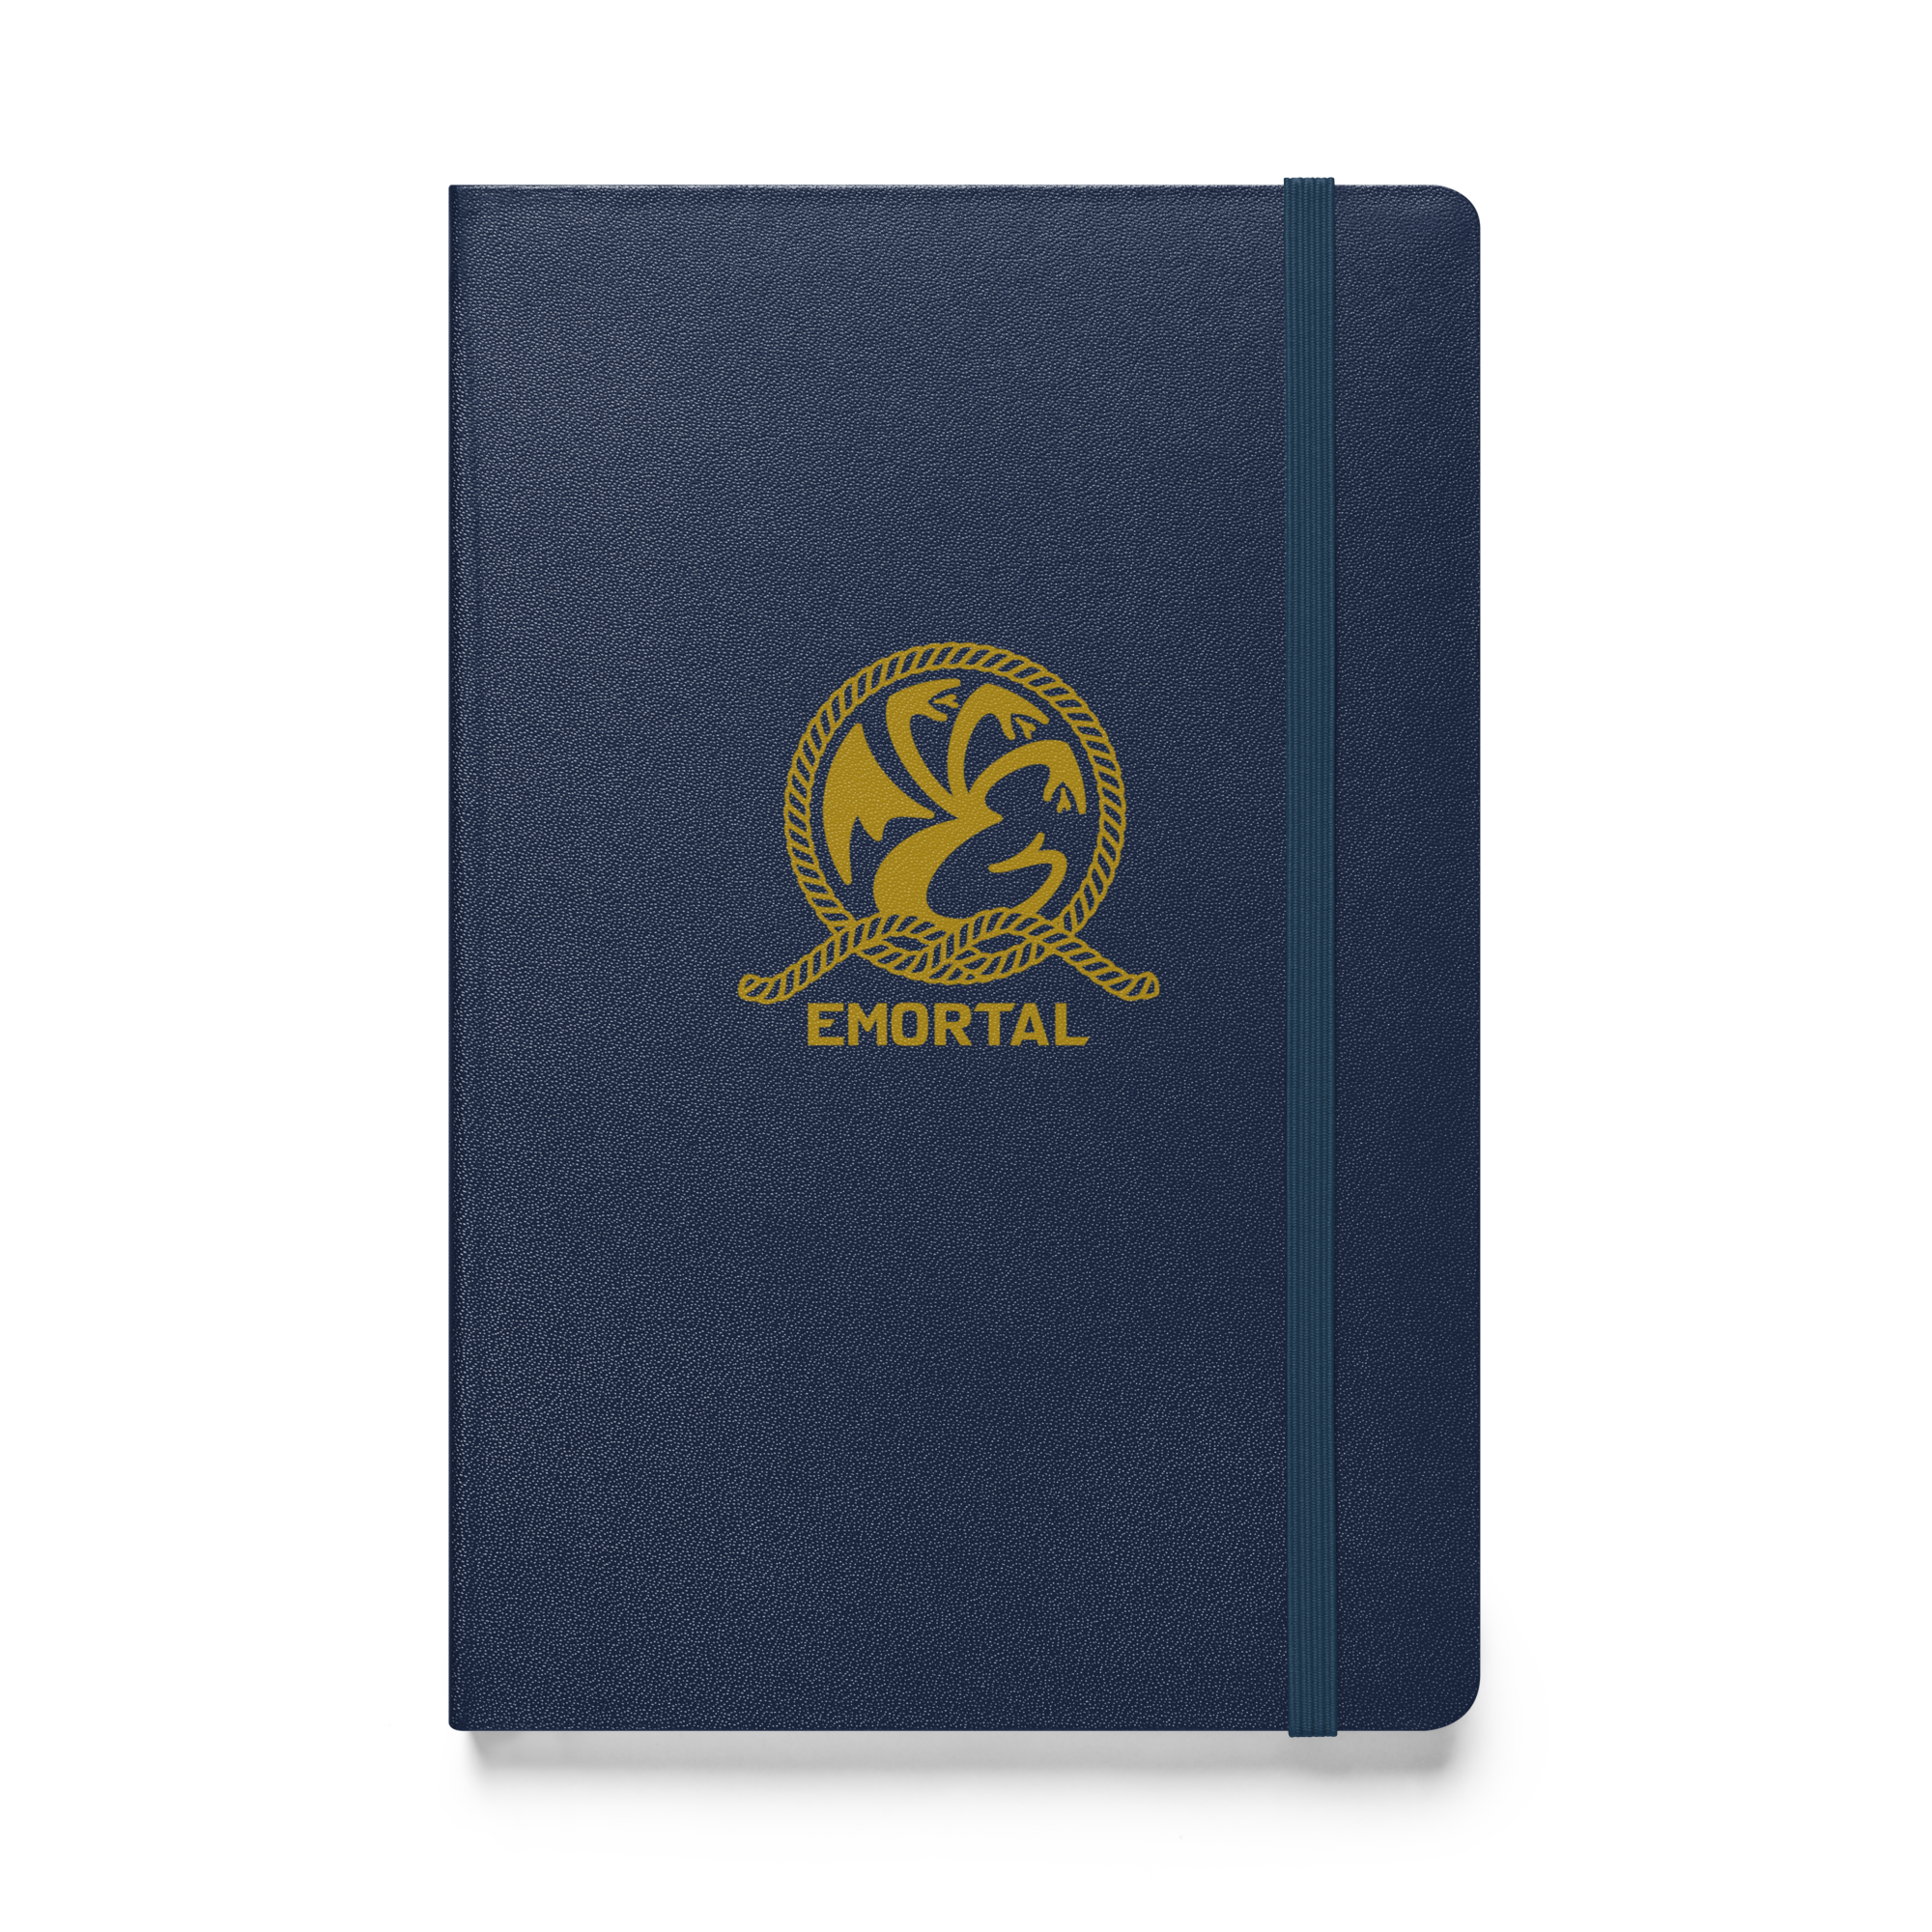 Meet the EMORTAL Daily Journal Notebook, your ultimate partner for jotting down ideas, planning your days, or unleashing your creativity. Whether for work or personal use, this notebook is crafted to inspire and support all your writing, sketching, and organizational tasks.